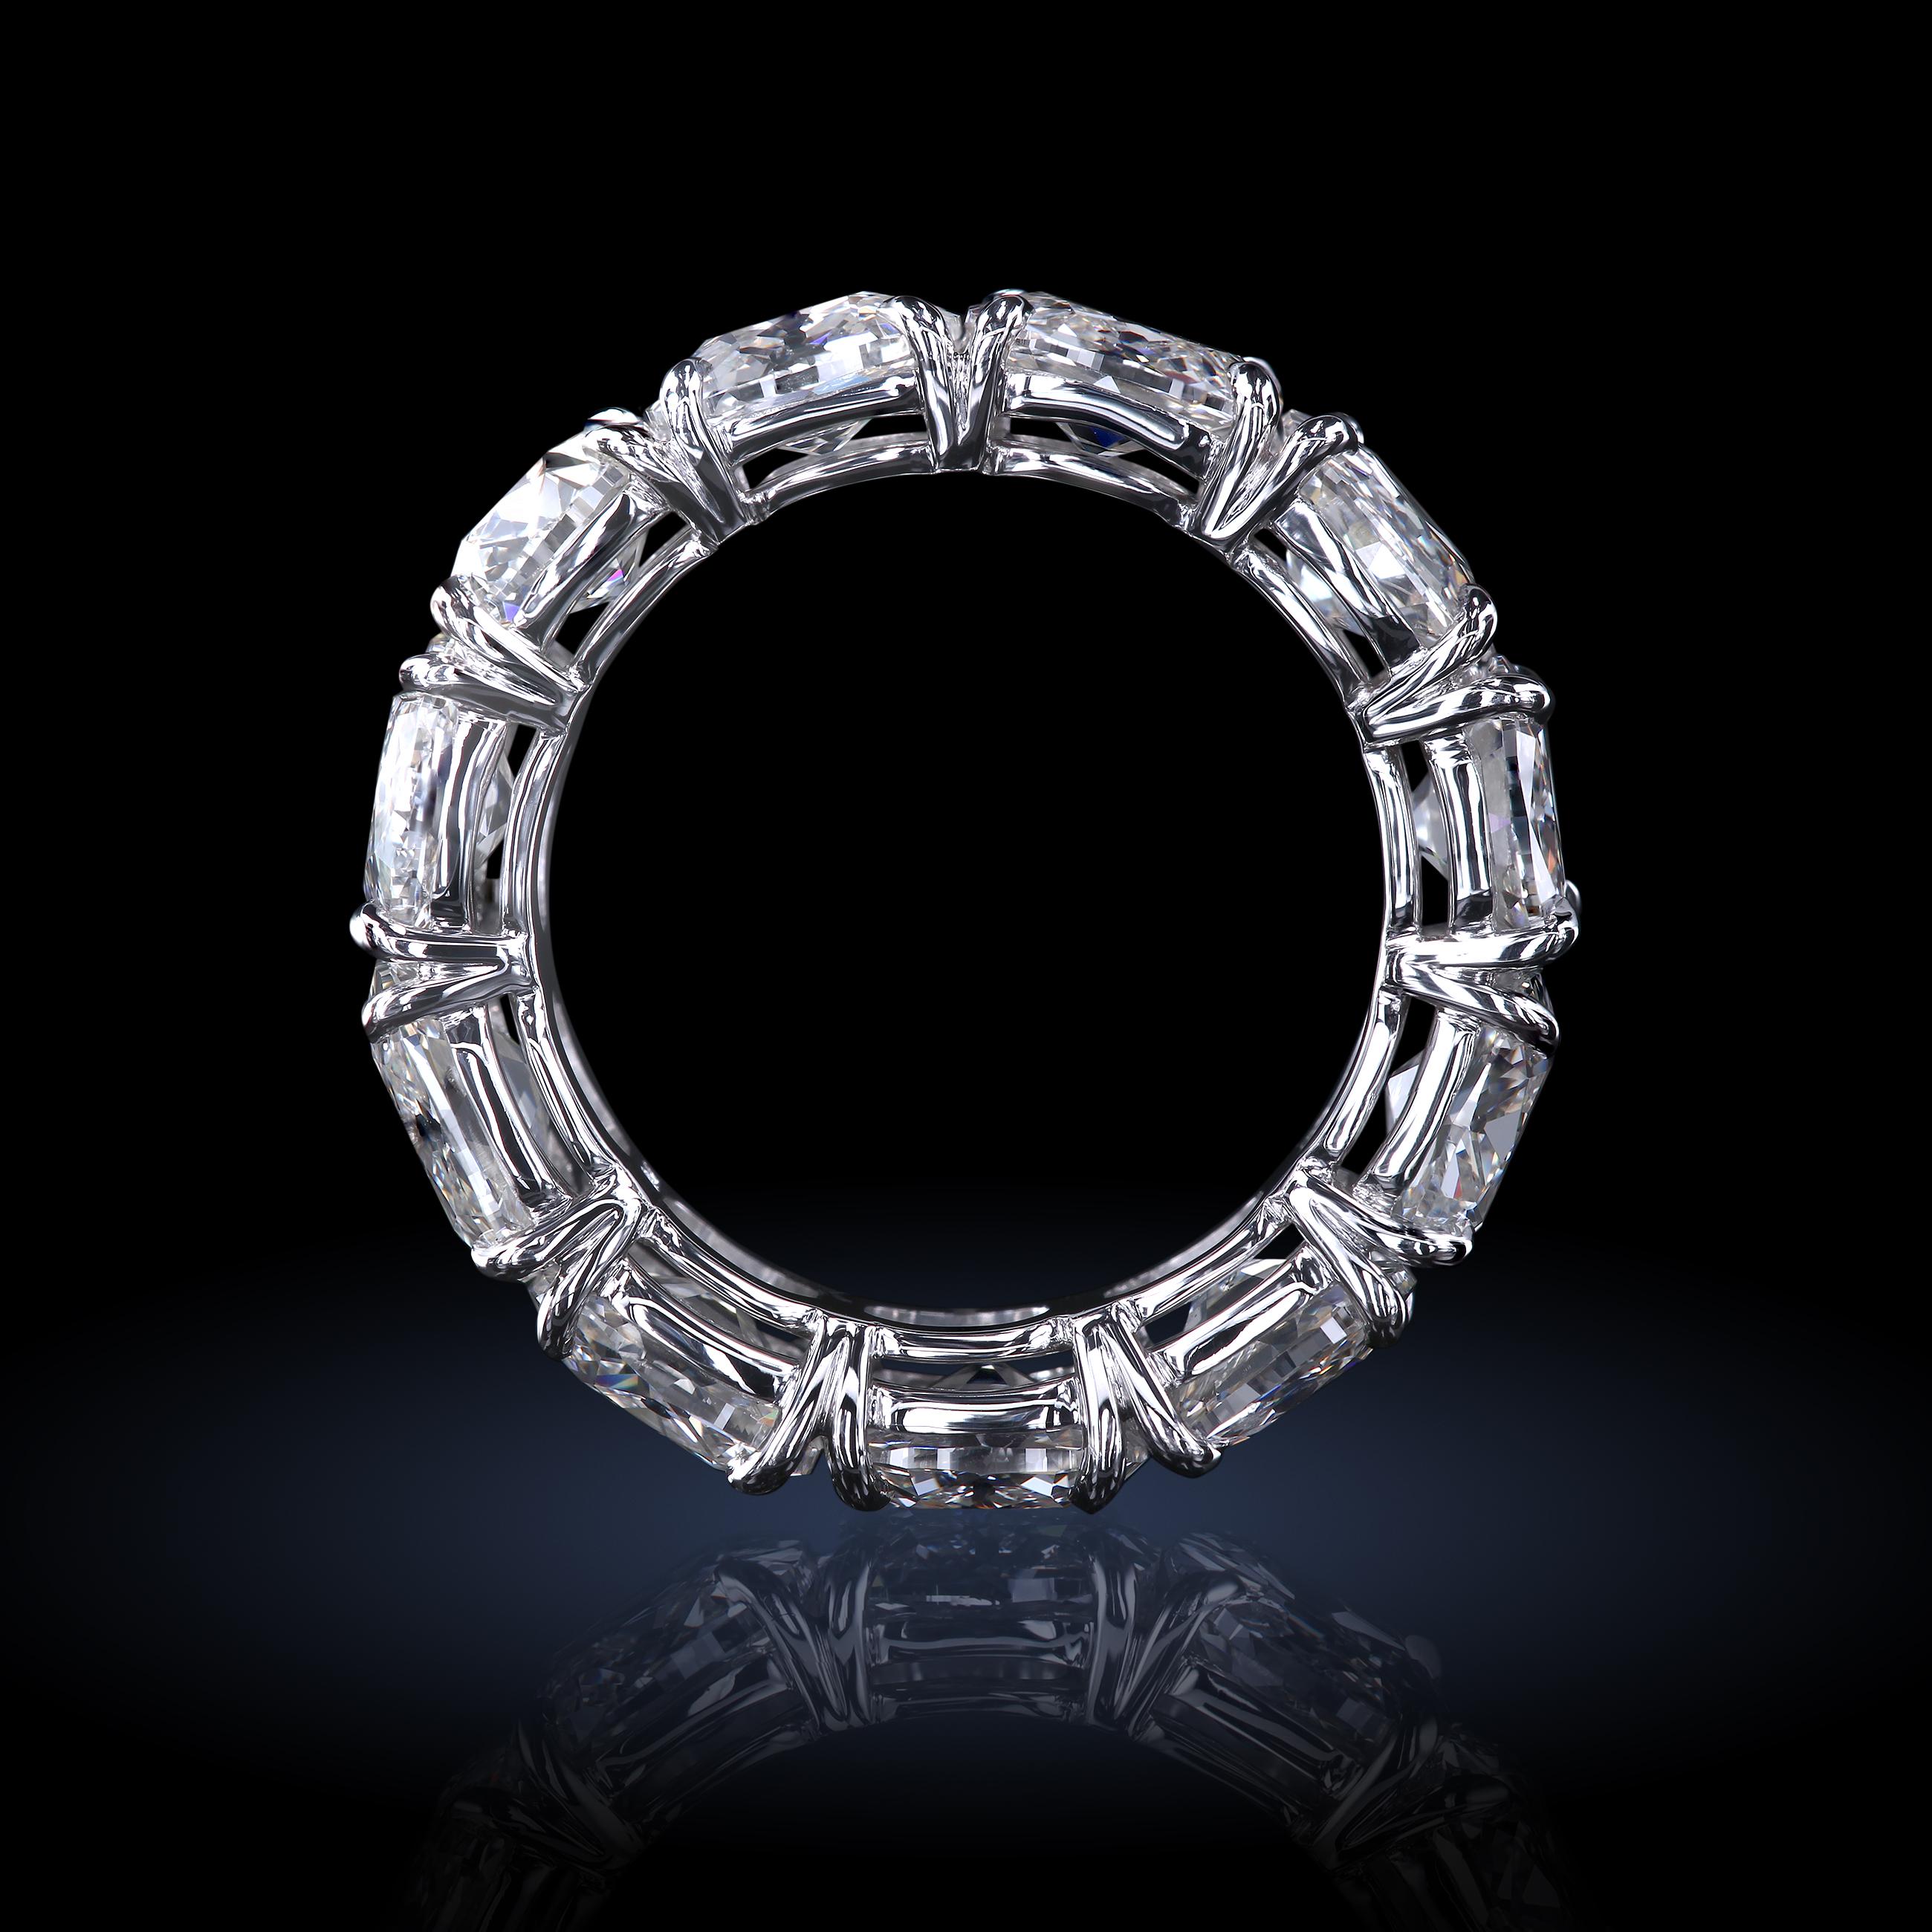 The eternity-set diamond band with 10 antique cushion diamonds extremely low to the finger and ultra-smooth, 
7 mm wide
Finger size 6
Handmade in platinum
All GIA certified stones:
1.03 I/VS1
1.02 H/IF
1.03 H/VVS1
1.07 H/SI1
1.02 H/SI2
1.17